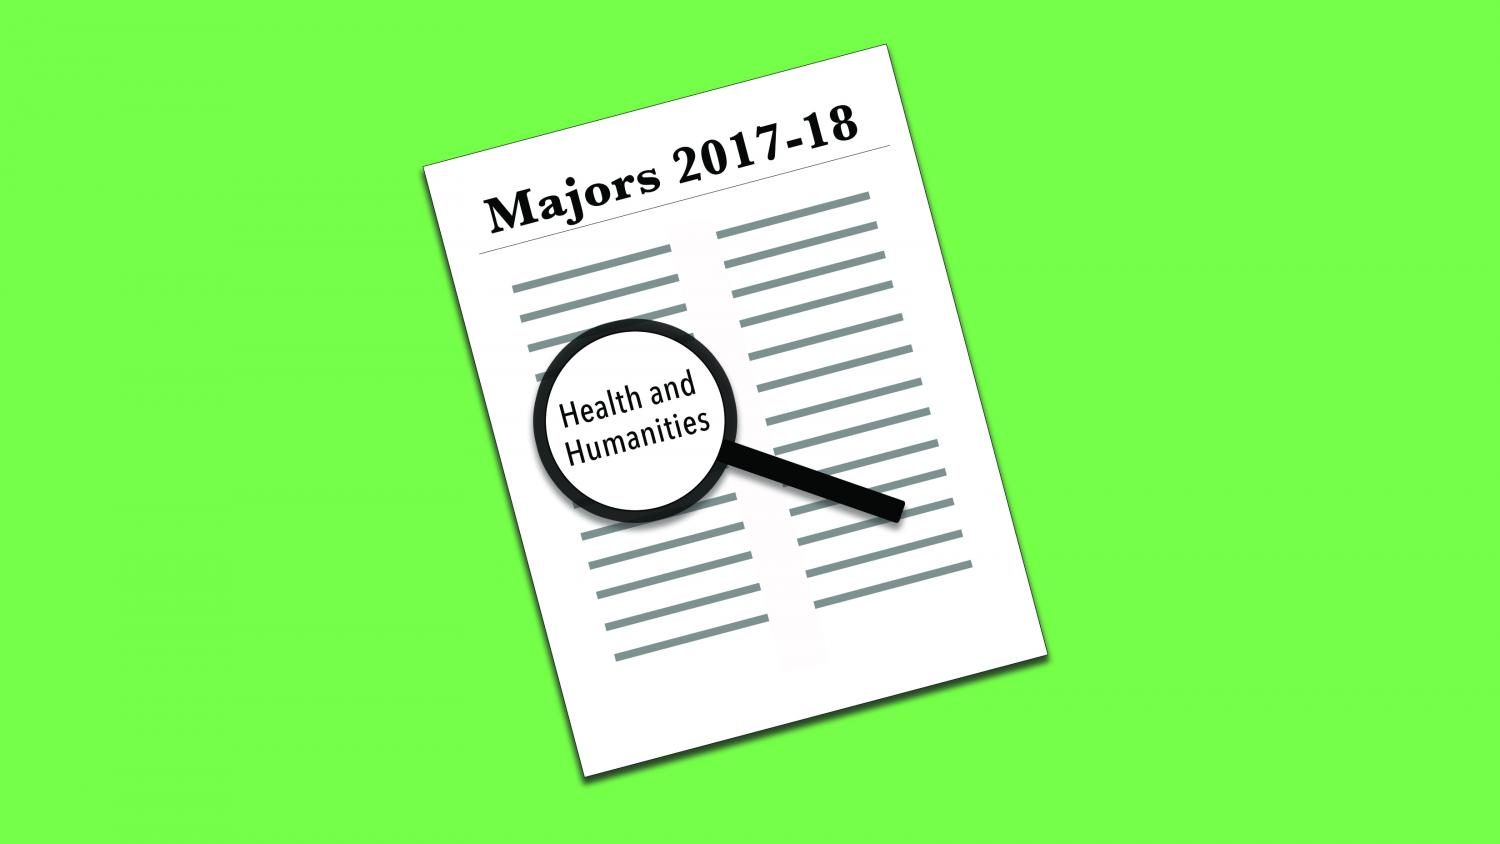 Health+humanities+major+added+for+2017-18